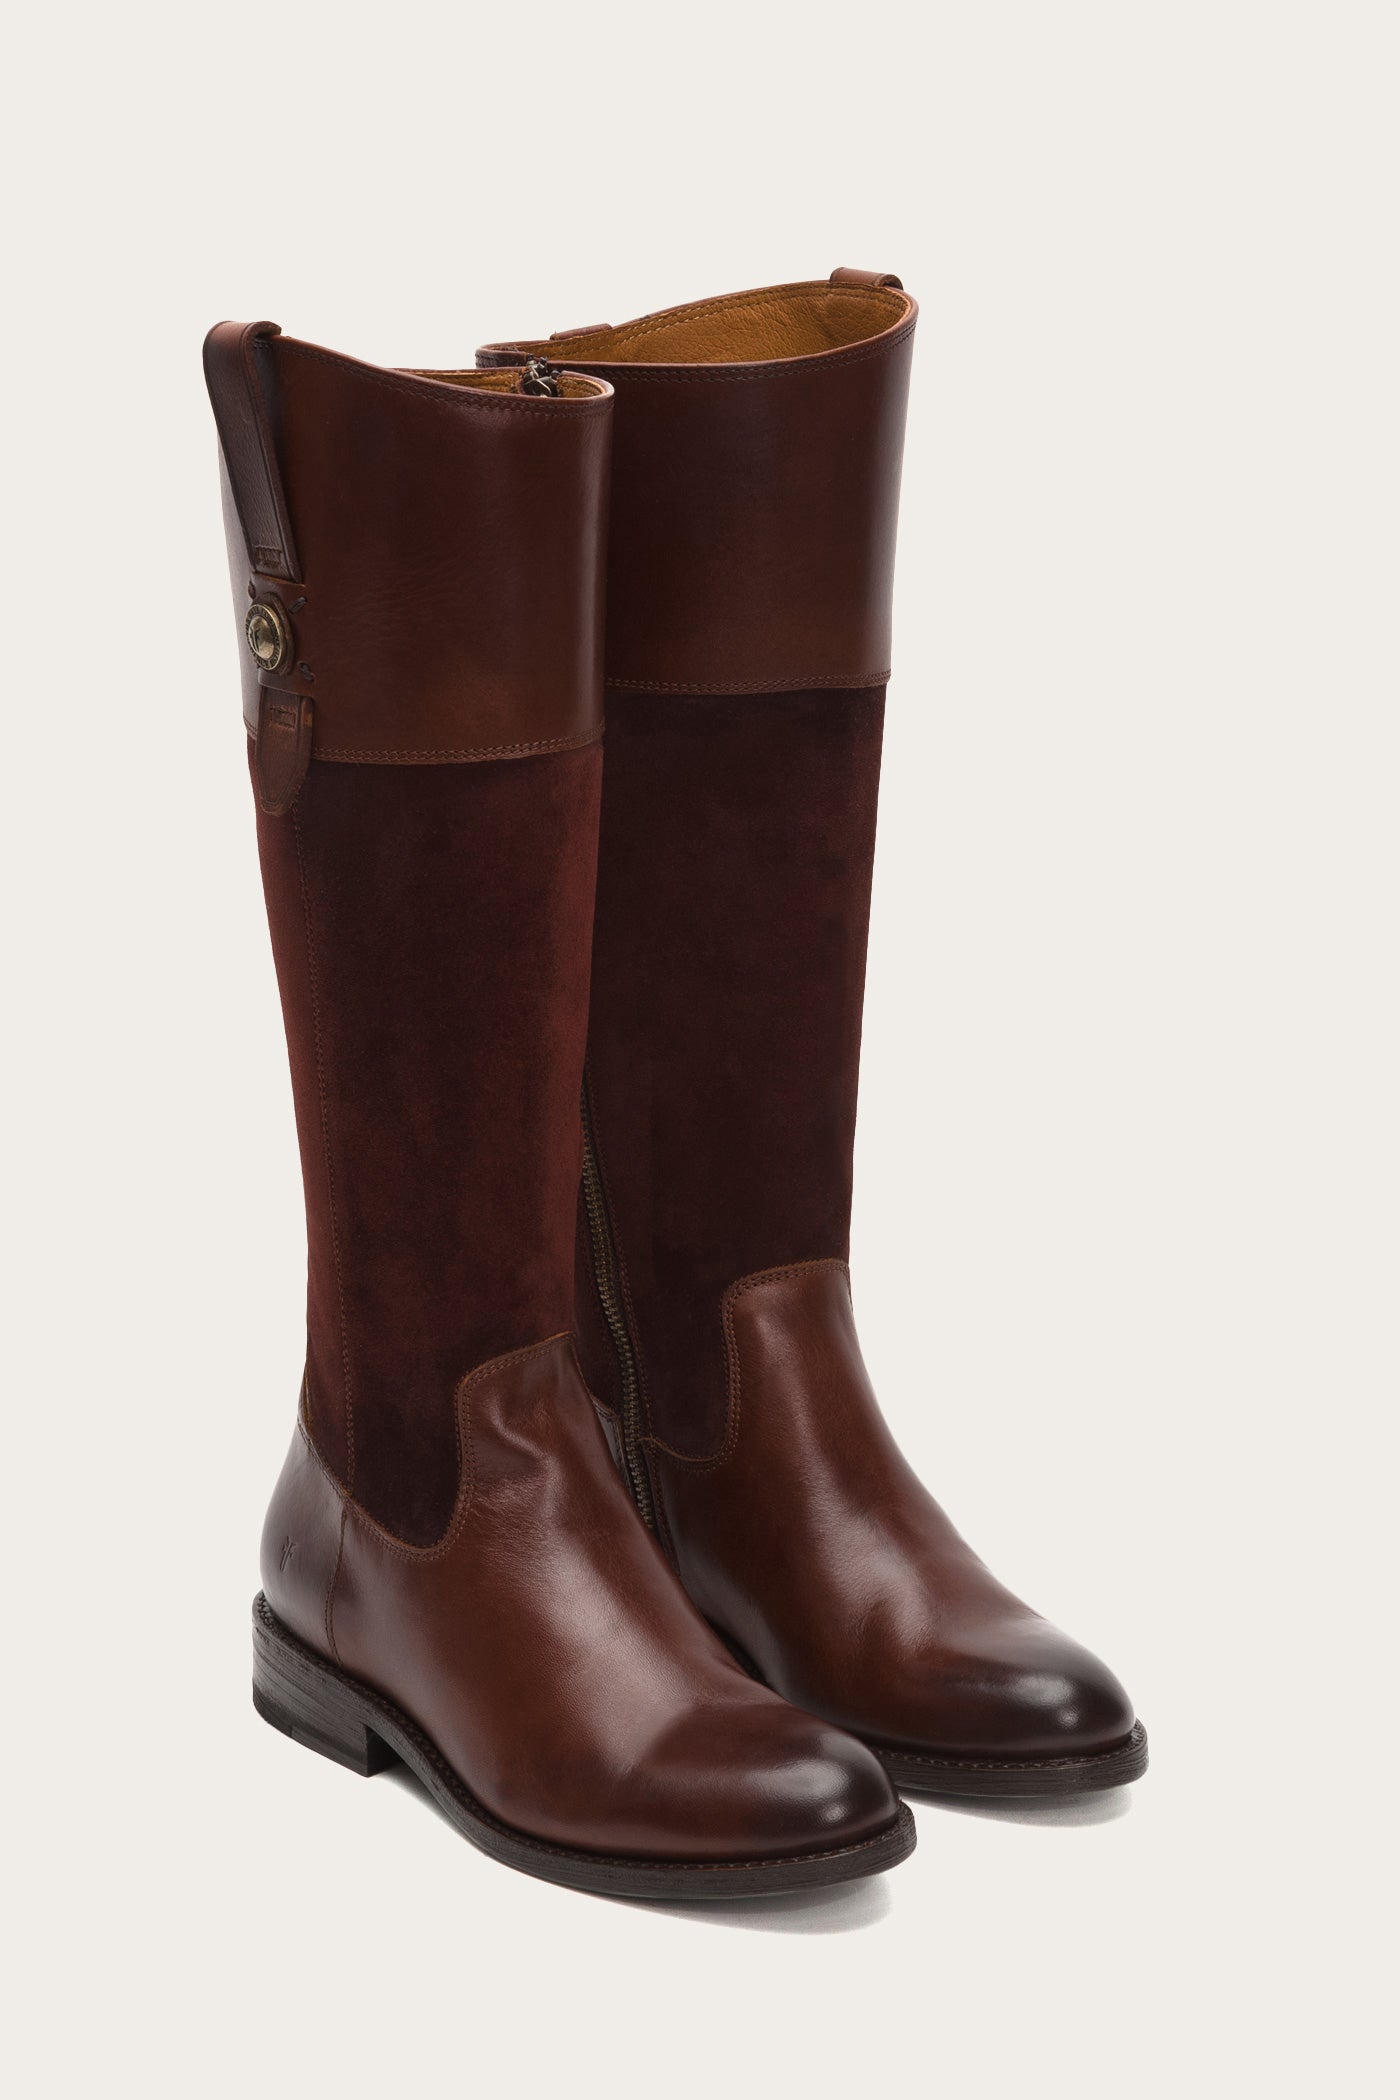 frye women's jayden button tall leather and suede riding boot